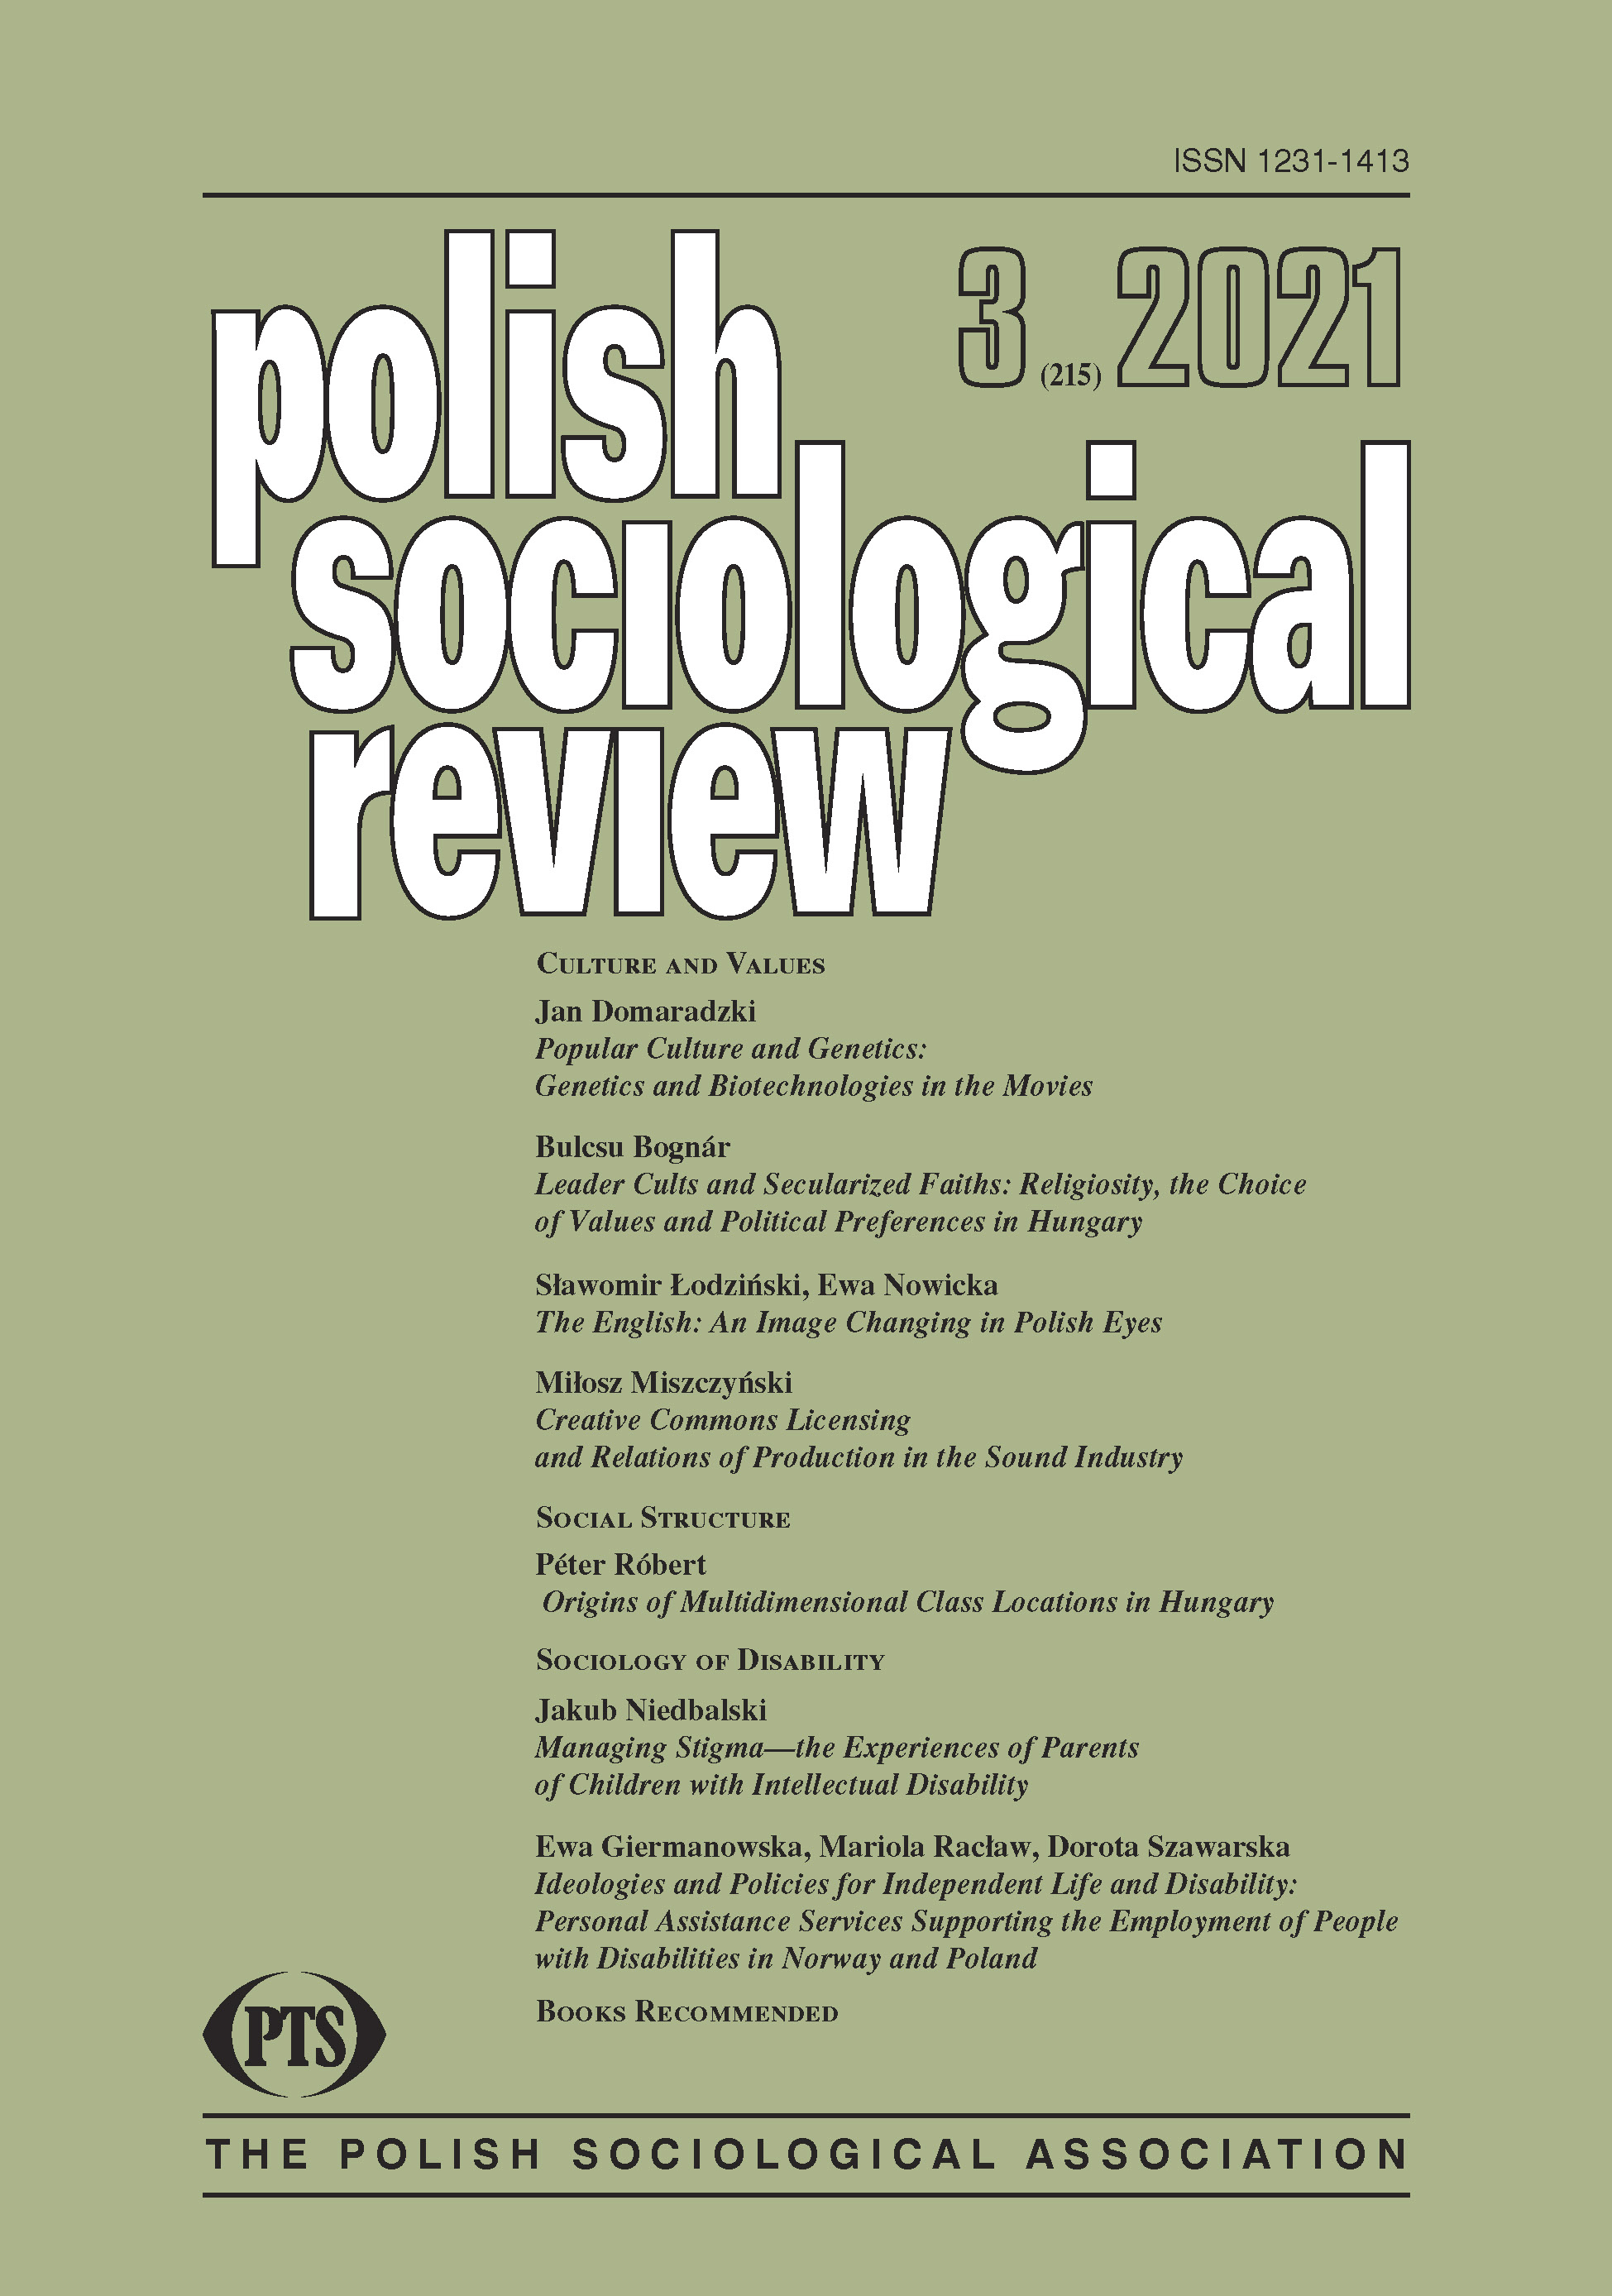 Leader Cults and Secularized Faiths:
Religiosity, the Choice of Values and Political Preferences in Hungary Cover Image